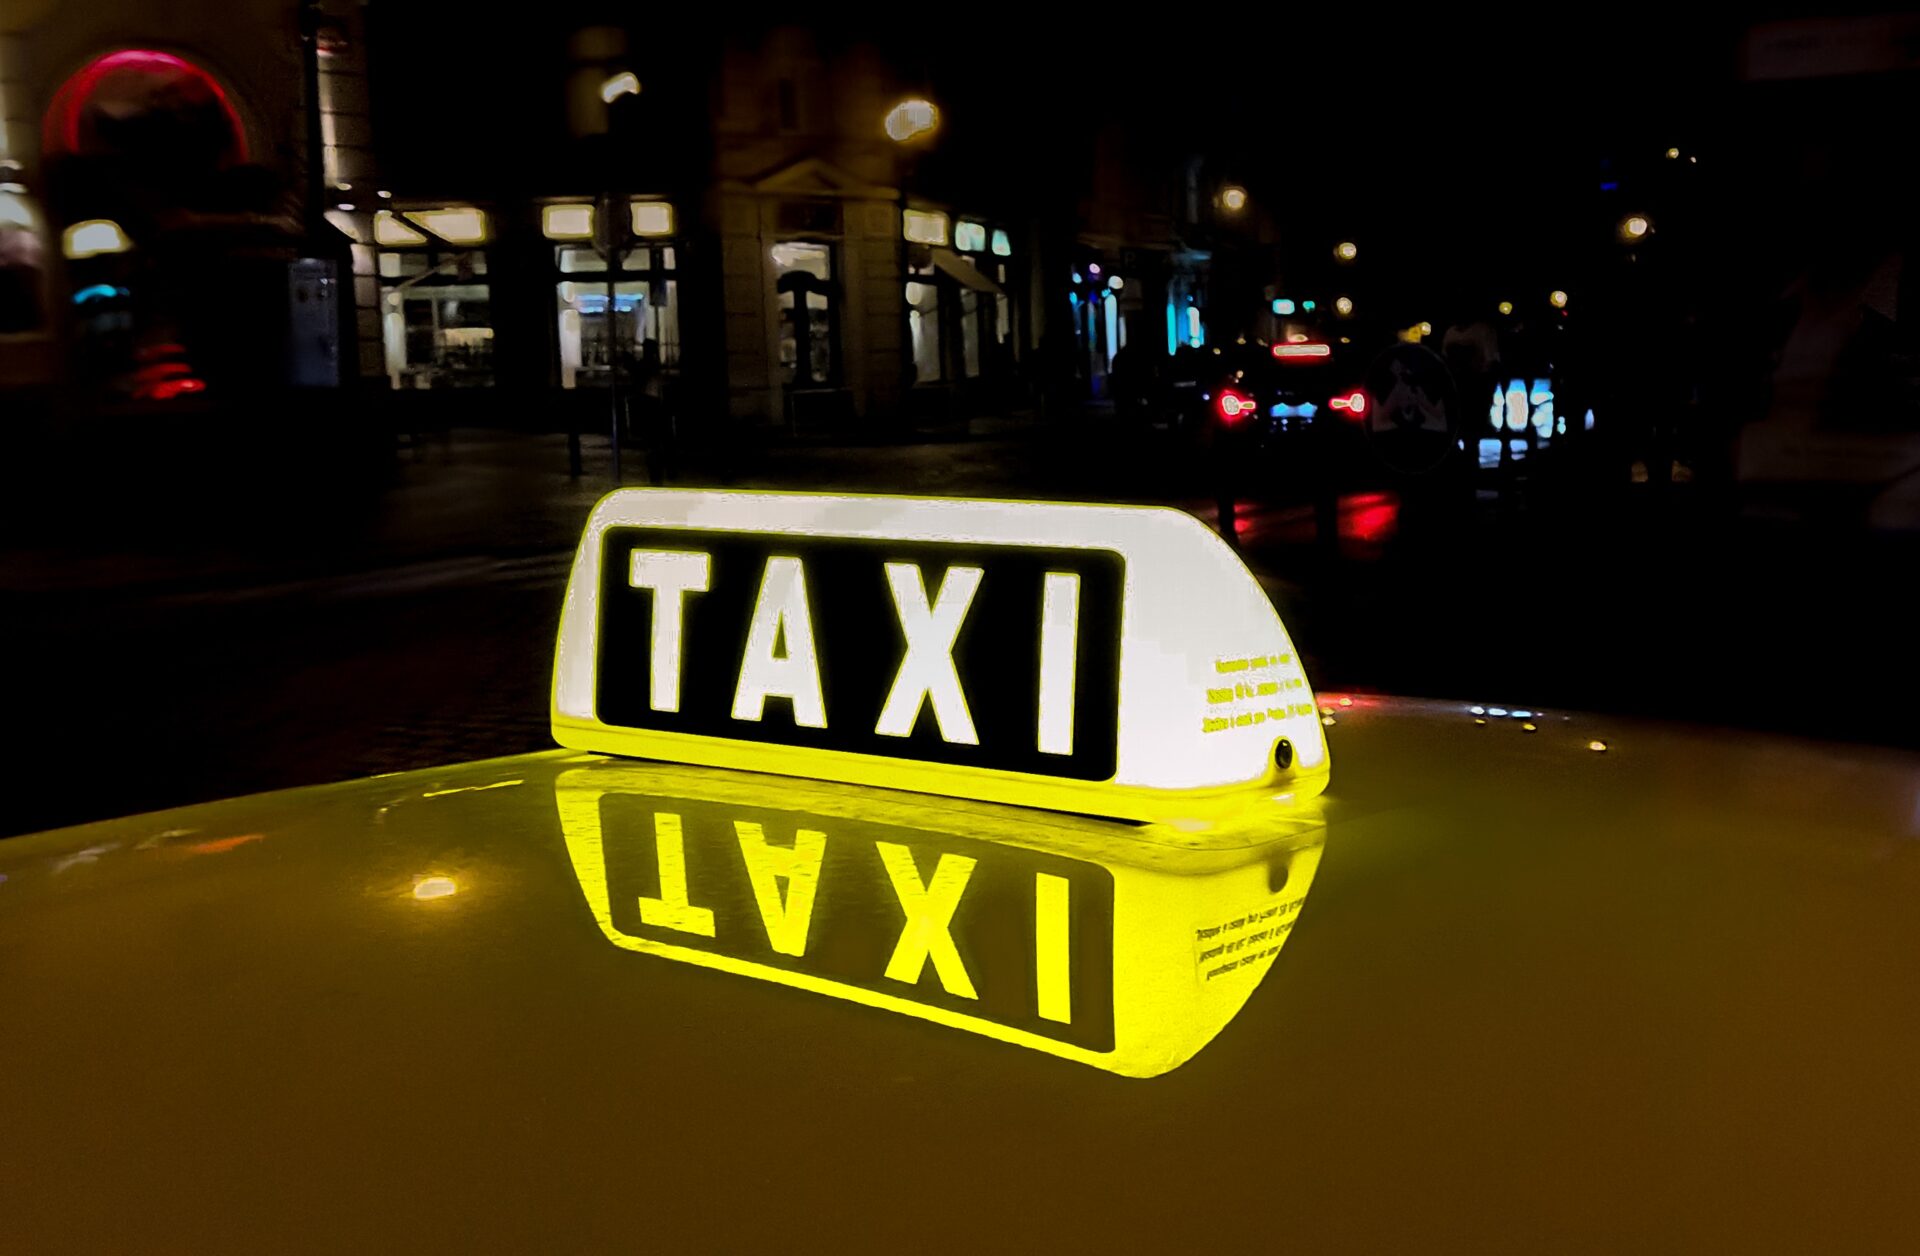 Lighted taxi sign at night (Photo by Skitterphoto from Pexels)